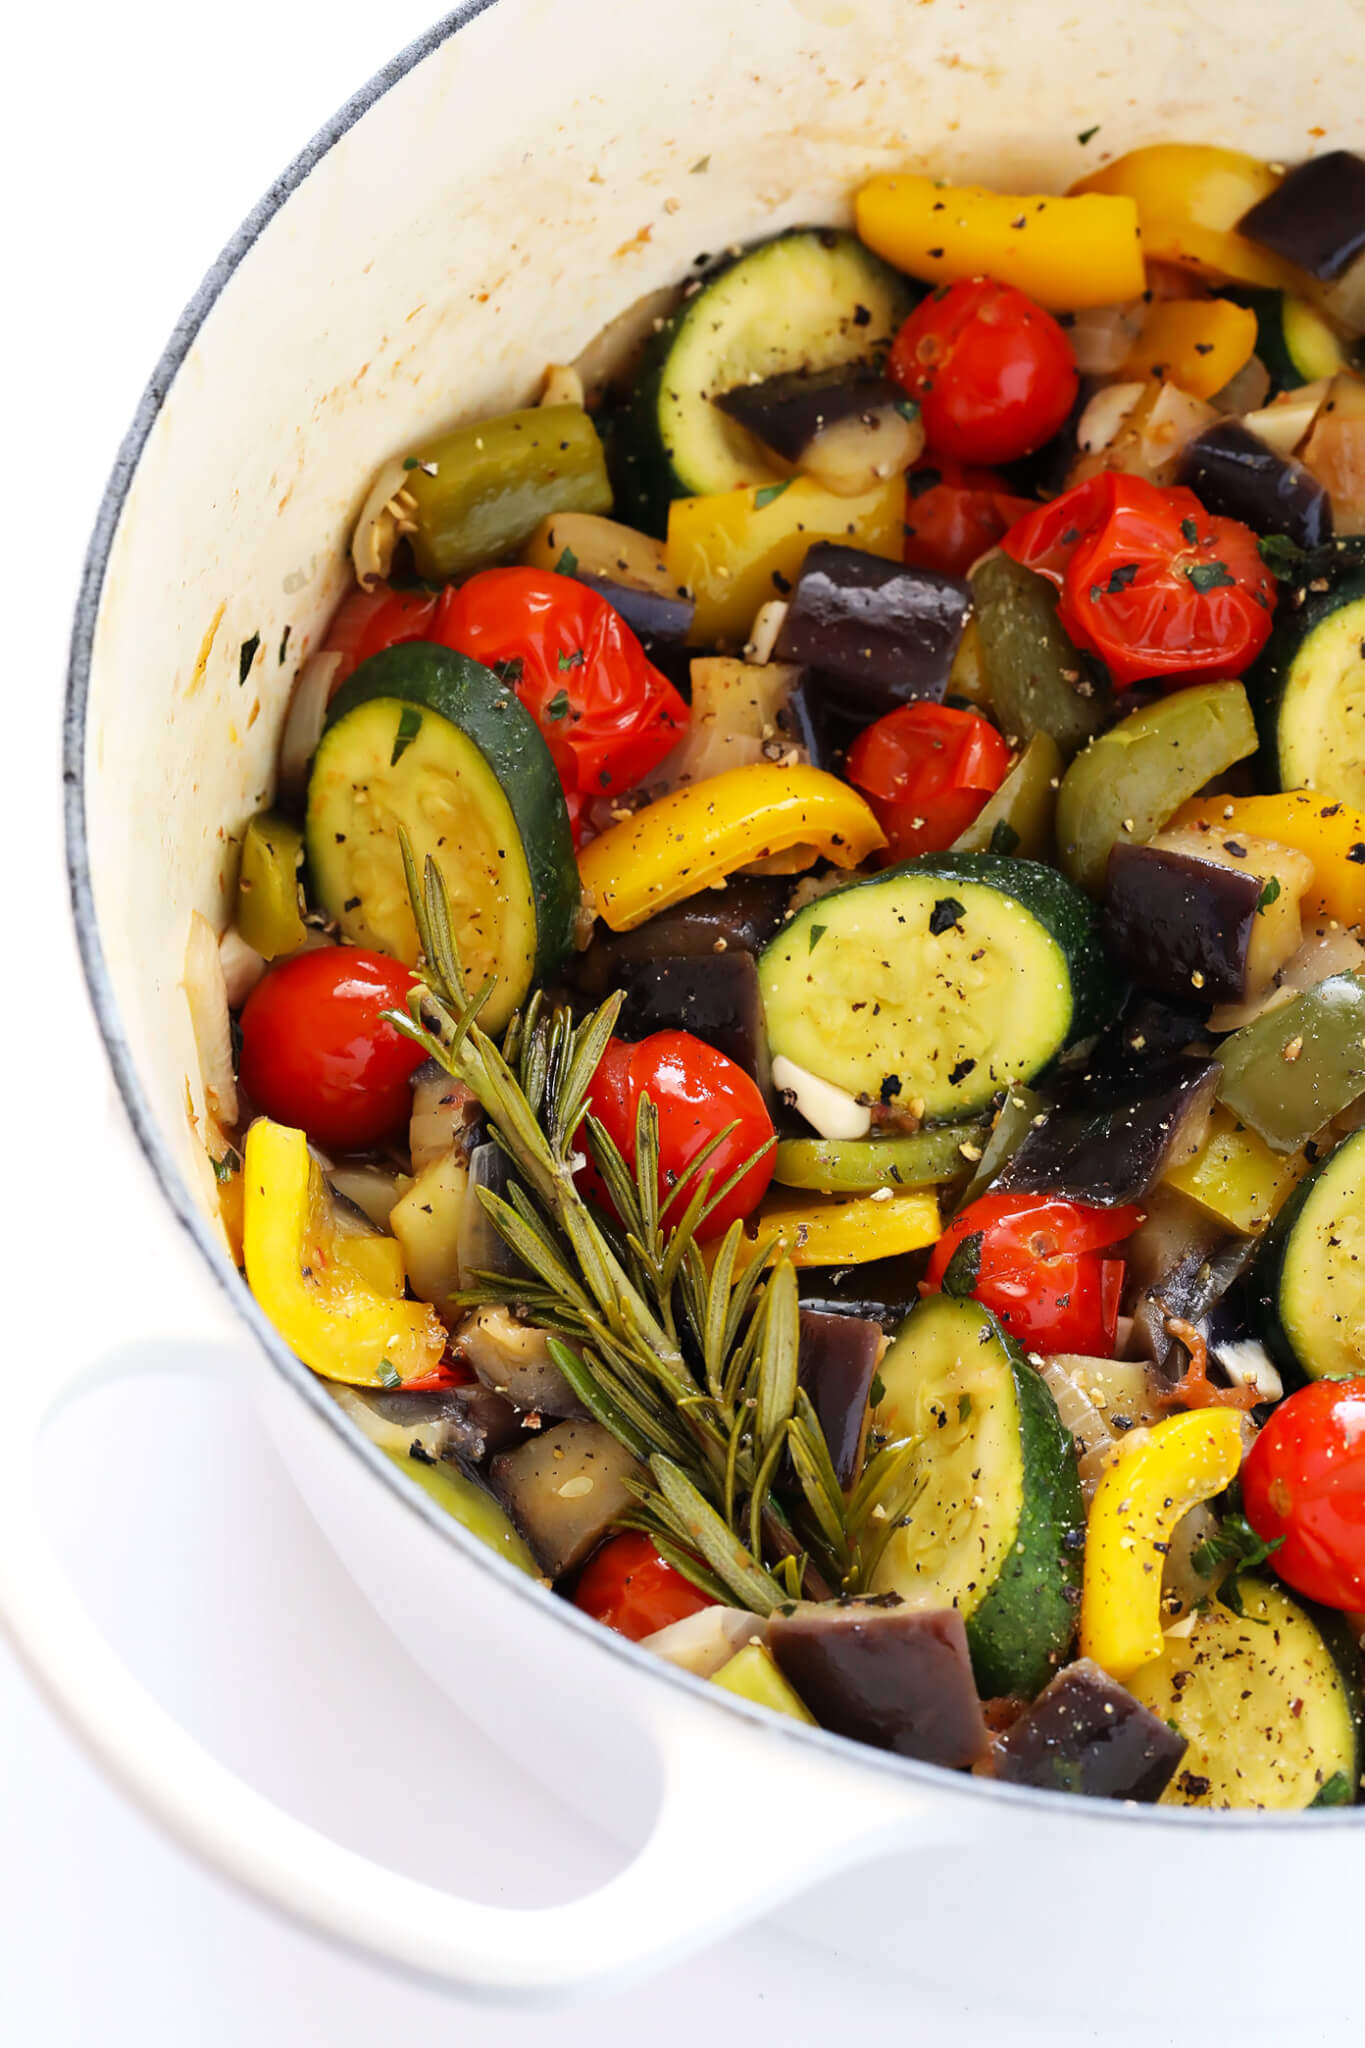 This ultra-easy Ratatouille recipe is the perfect way to use up summer vegetables (zucchini, eggplant, tomato, bell peppers, you name it!), and tastes absolutely delicious when served with crusty French bread (or pasta or quinoa or rice). An awesome healthy dinner idea, and one that's easy to customize with your favorite ingredients. | gimmesomeoven.com (Gluten-Free / Vegetarian / Vegan)